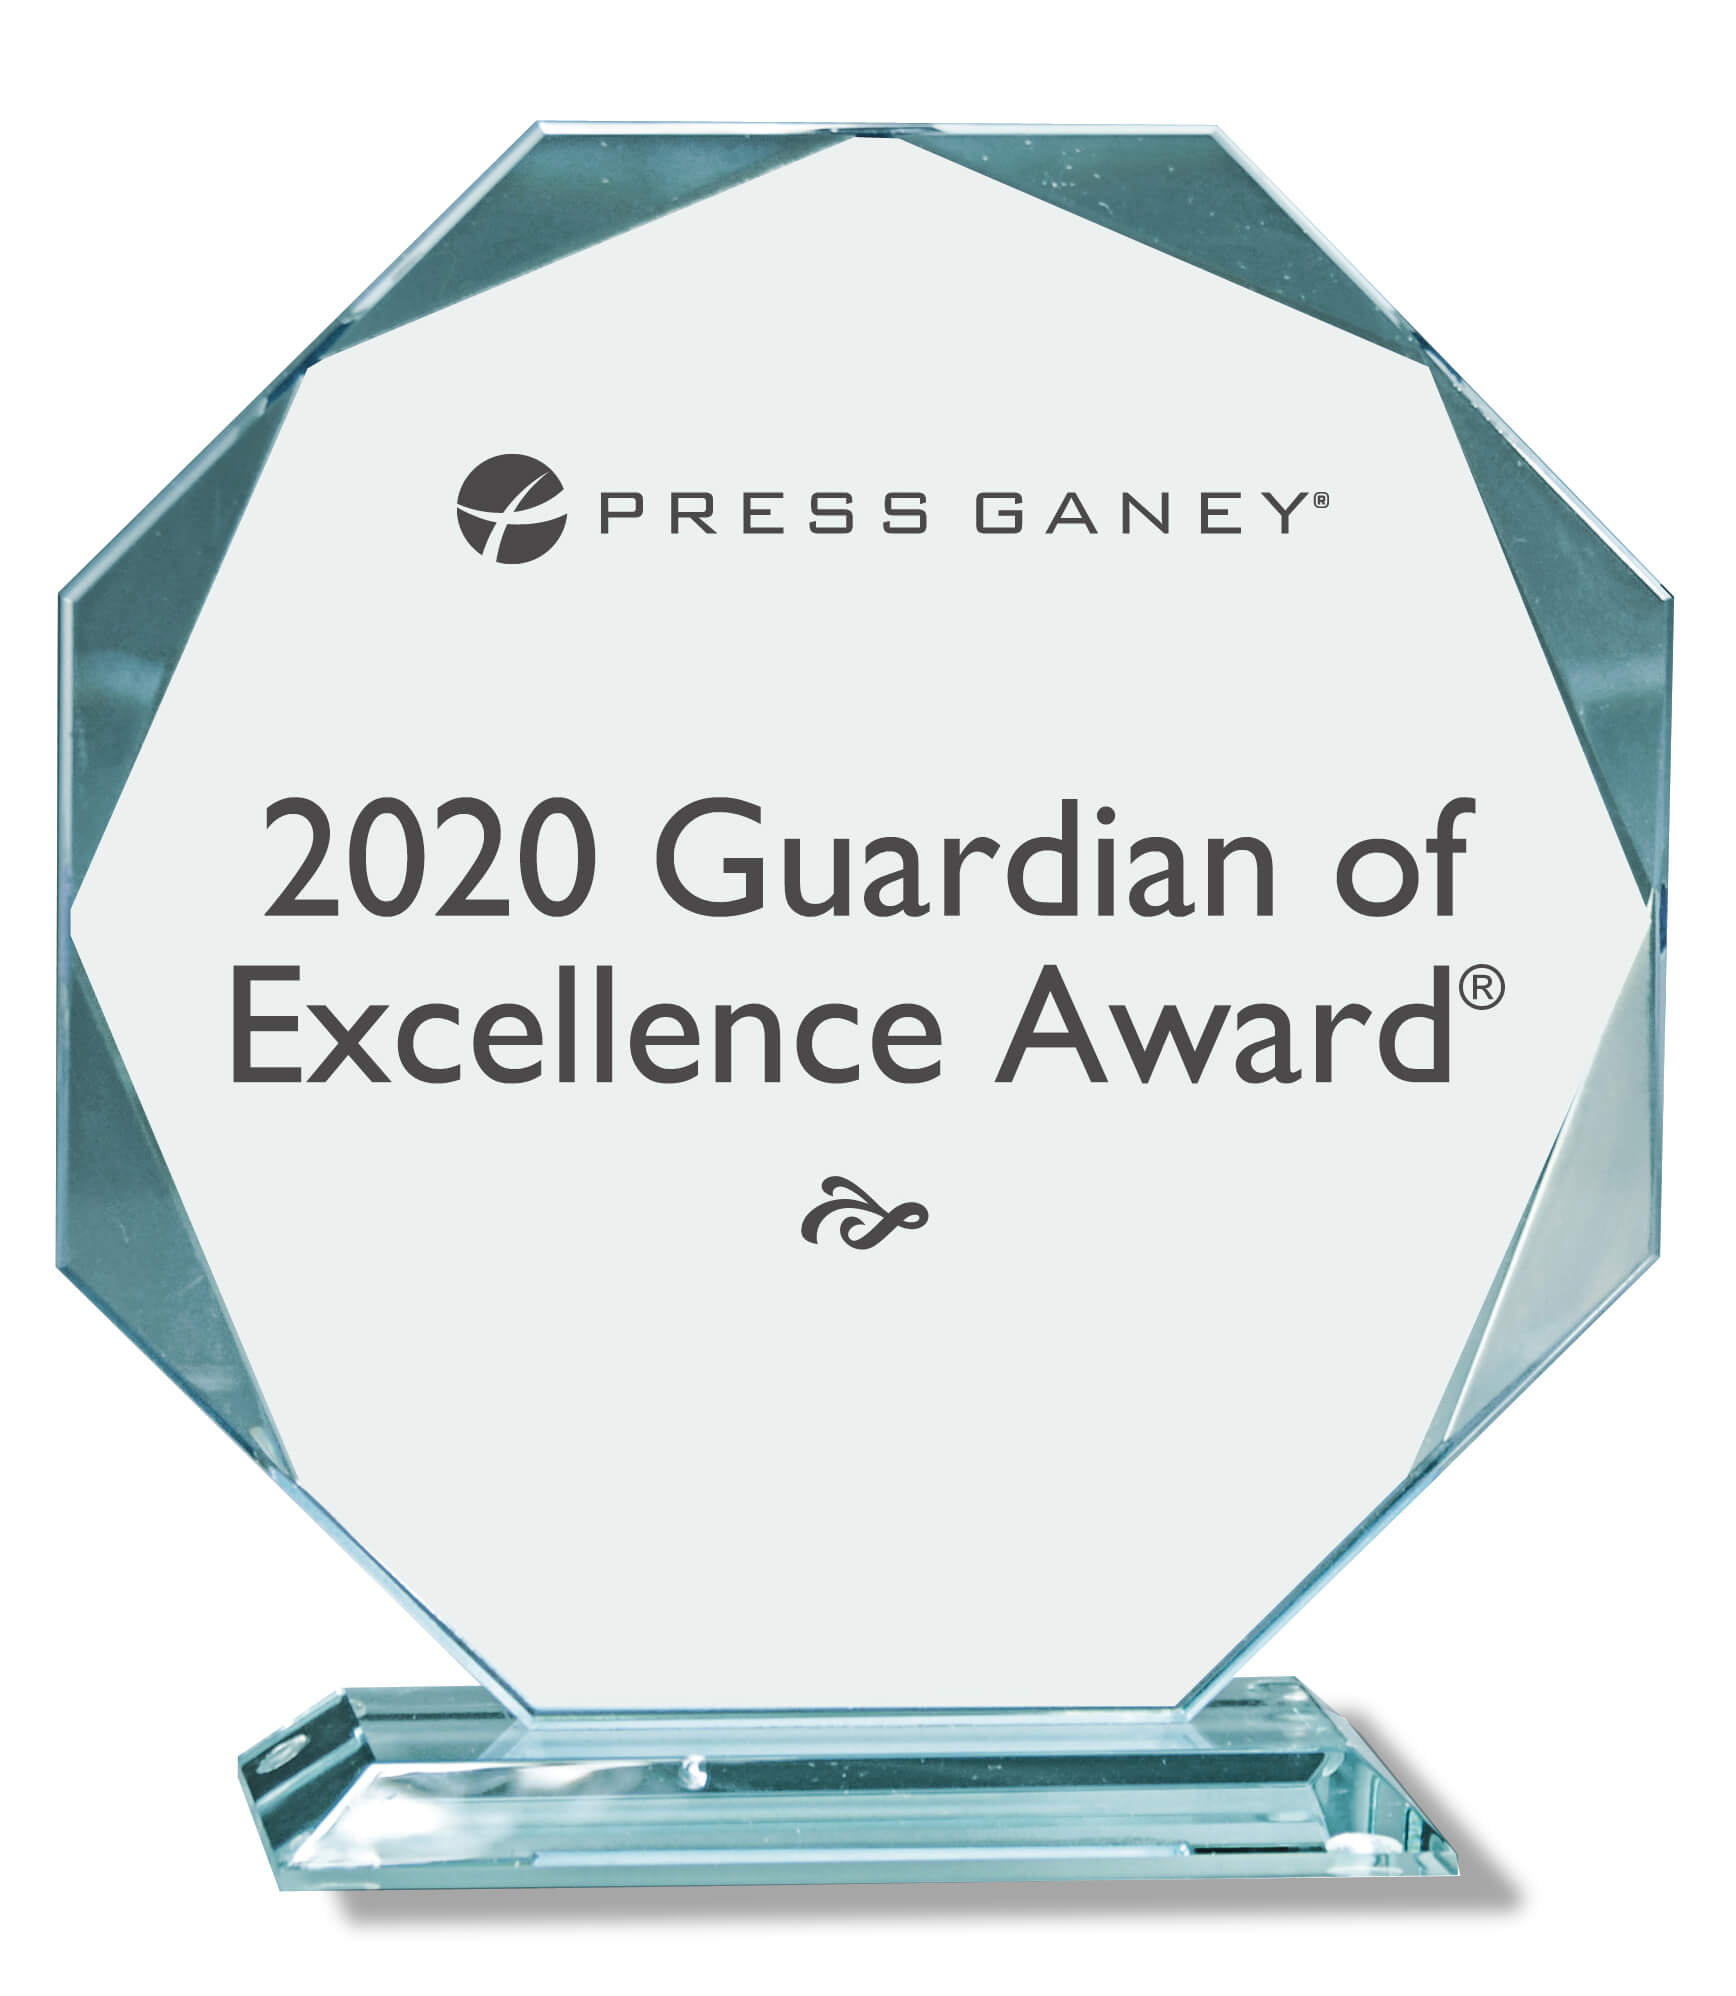 2020 Press Ganey Guardian of Excellence Award